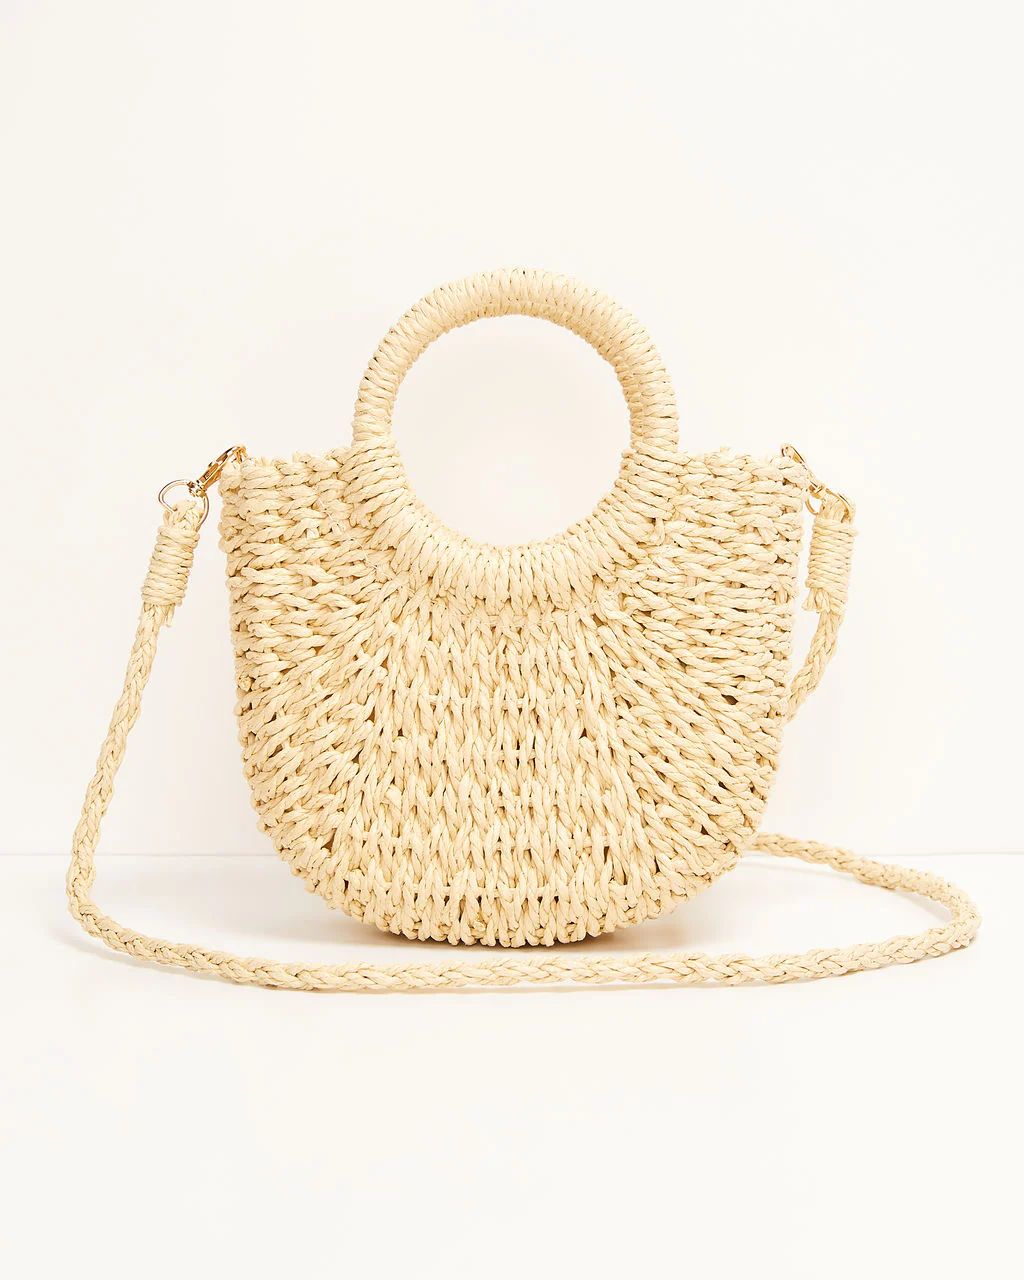 Valencia Small Rounded Straw Tote | VICI Collection